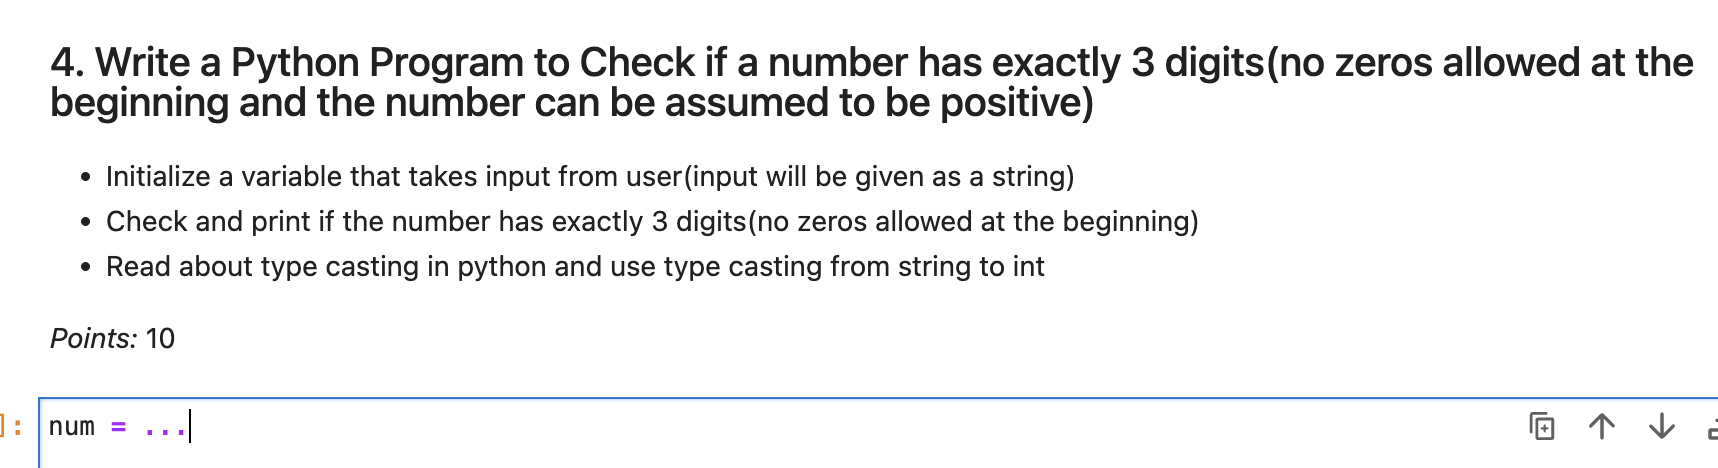 4. Write a Python Program to Check if a number has exactly 3 digits(no zeros allowed at the beginning and the